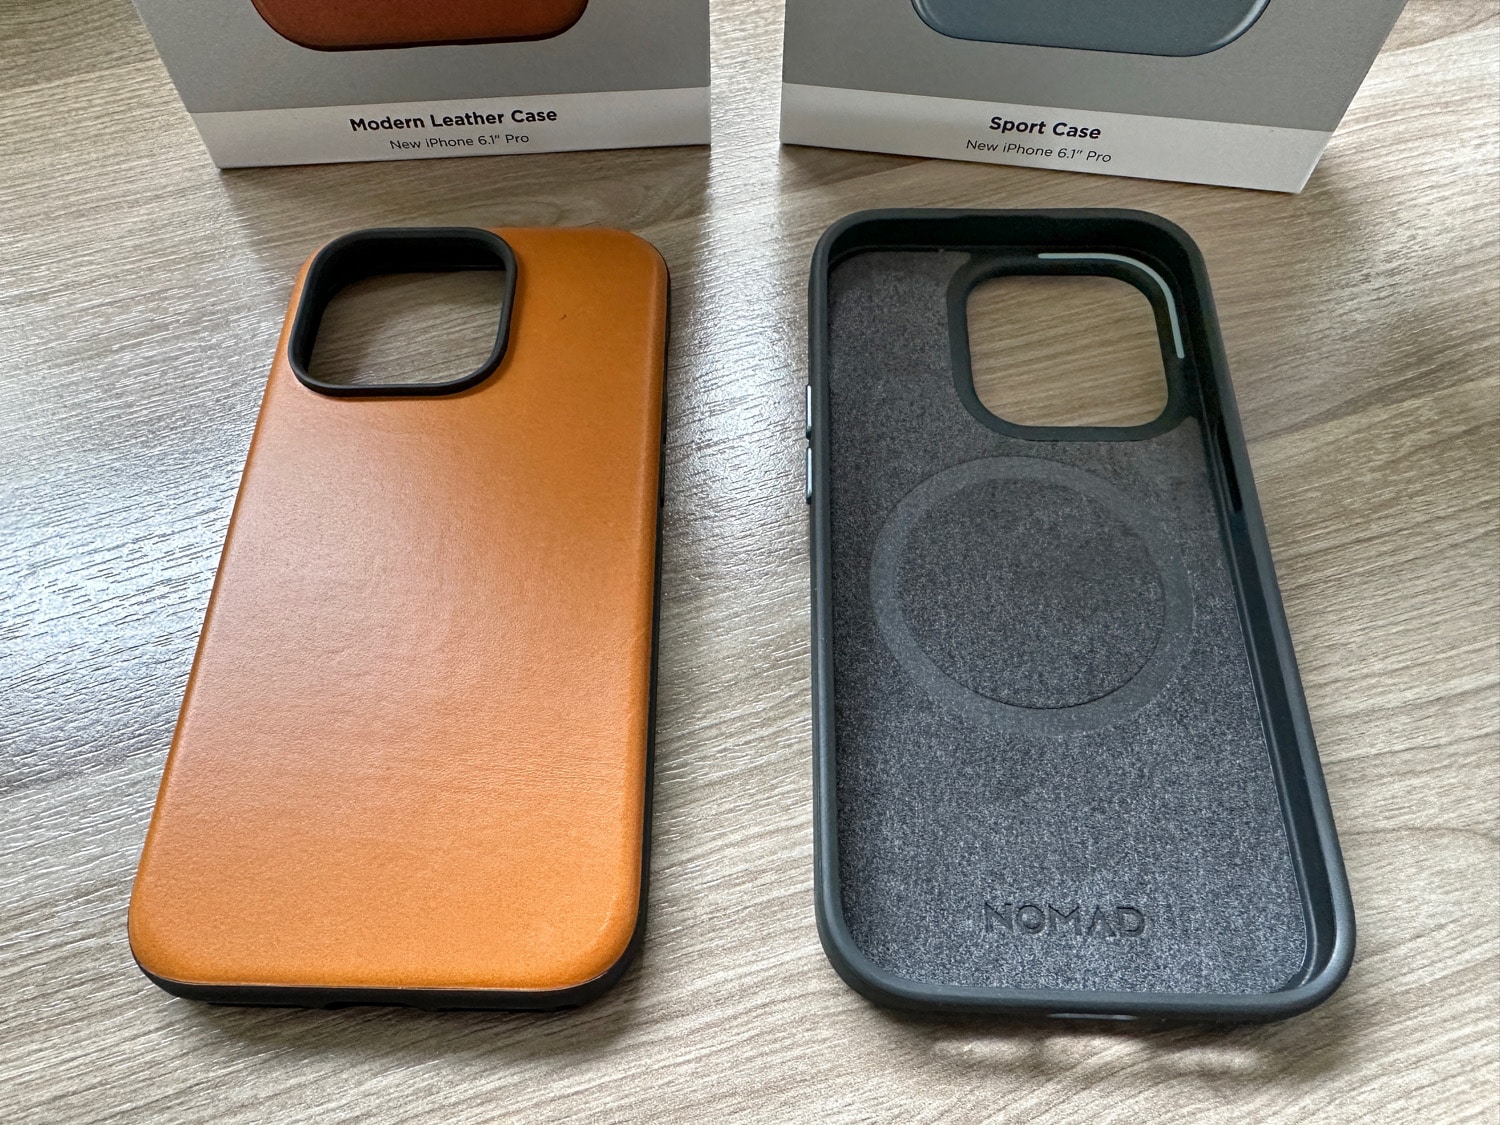 Iphone 14 | Accessories for the iPhone 14 Pro: Sport Case & Modern Leather Case by NOMAD | apple iphone | NOMAD iPhone 14 Pro Cases 2